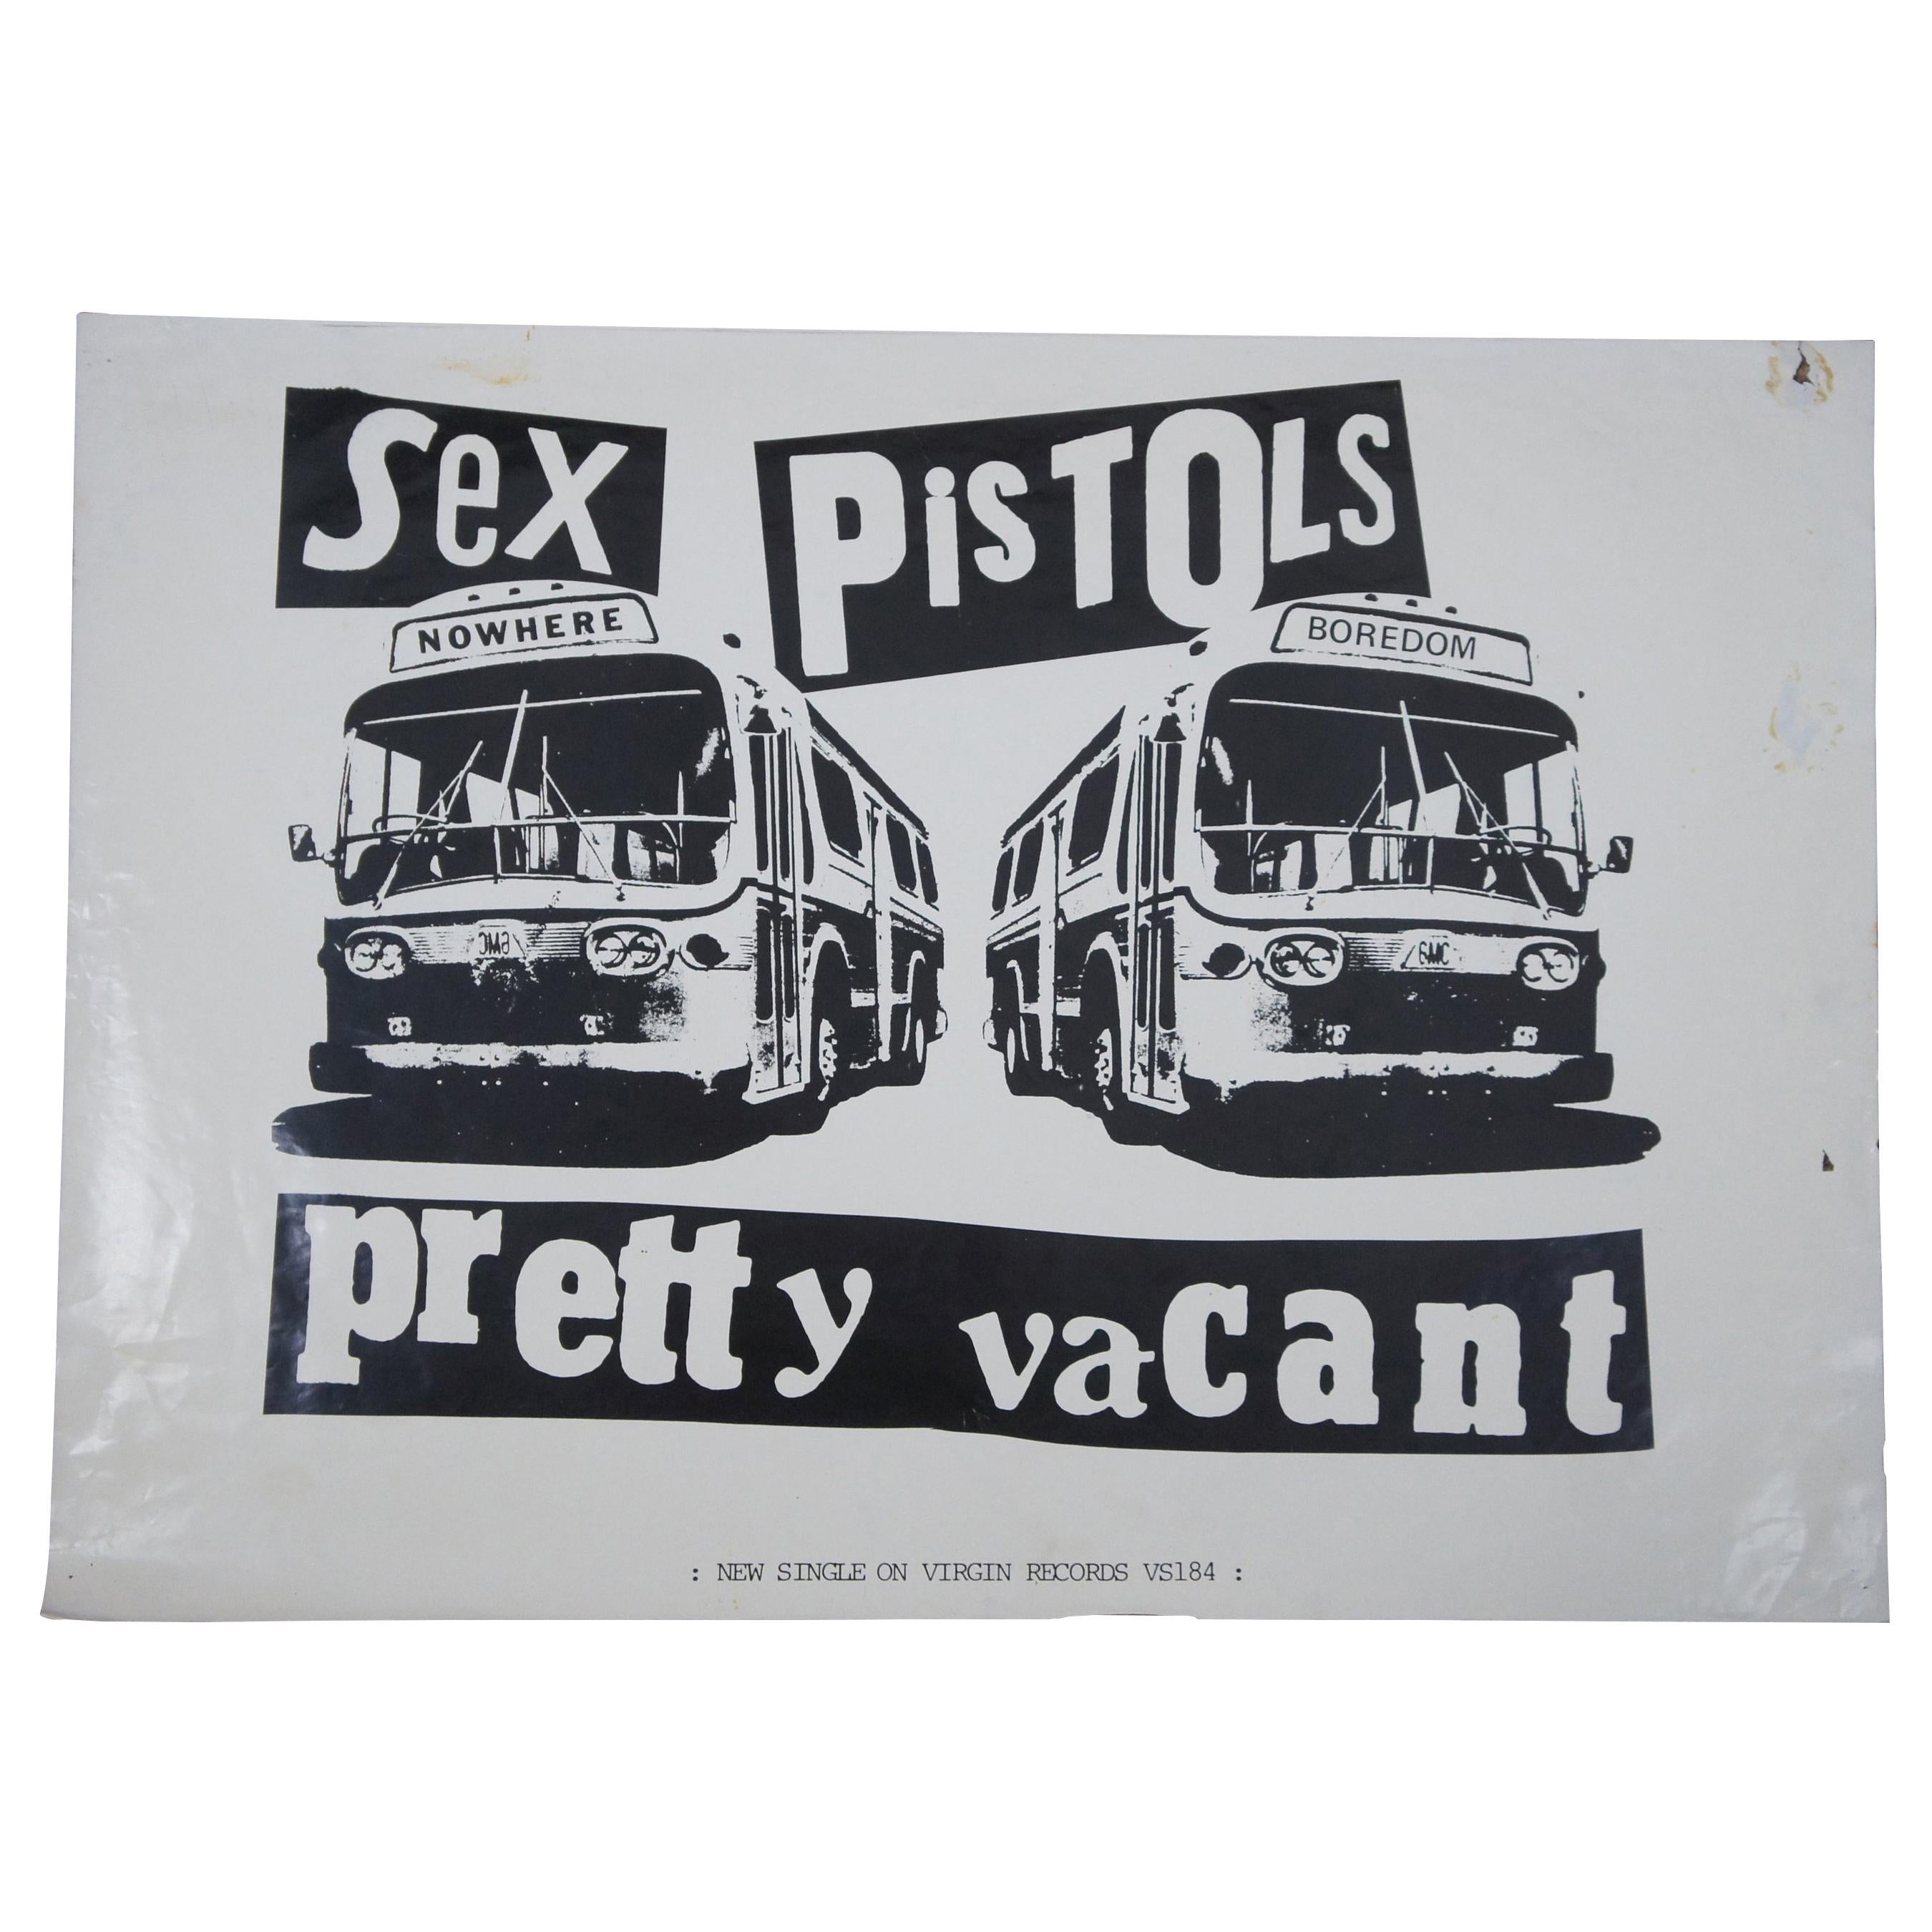 Budapest sex pistols in Question: What